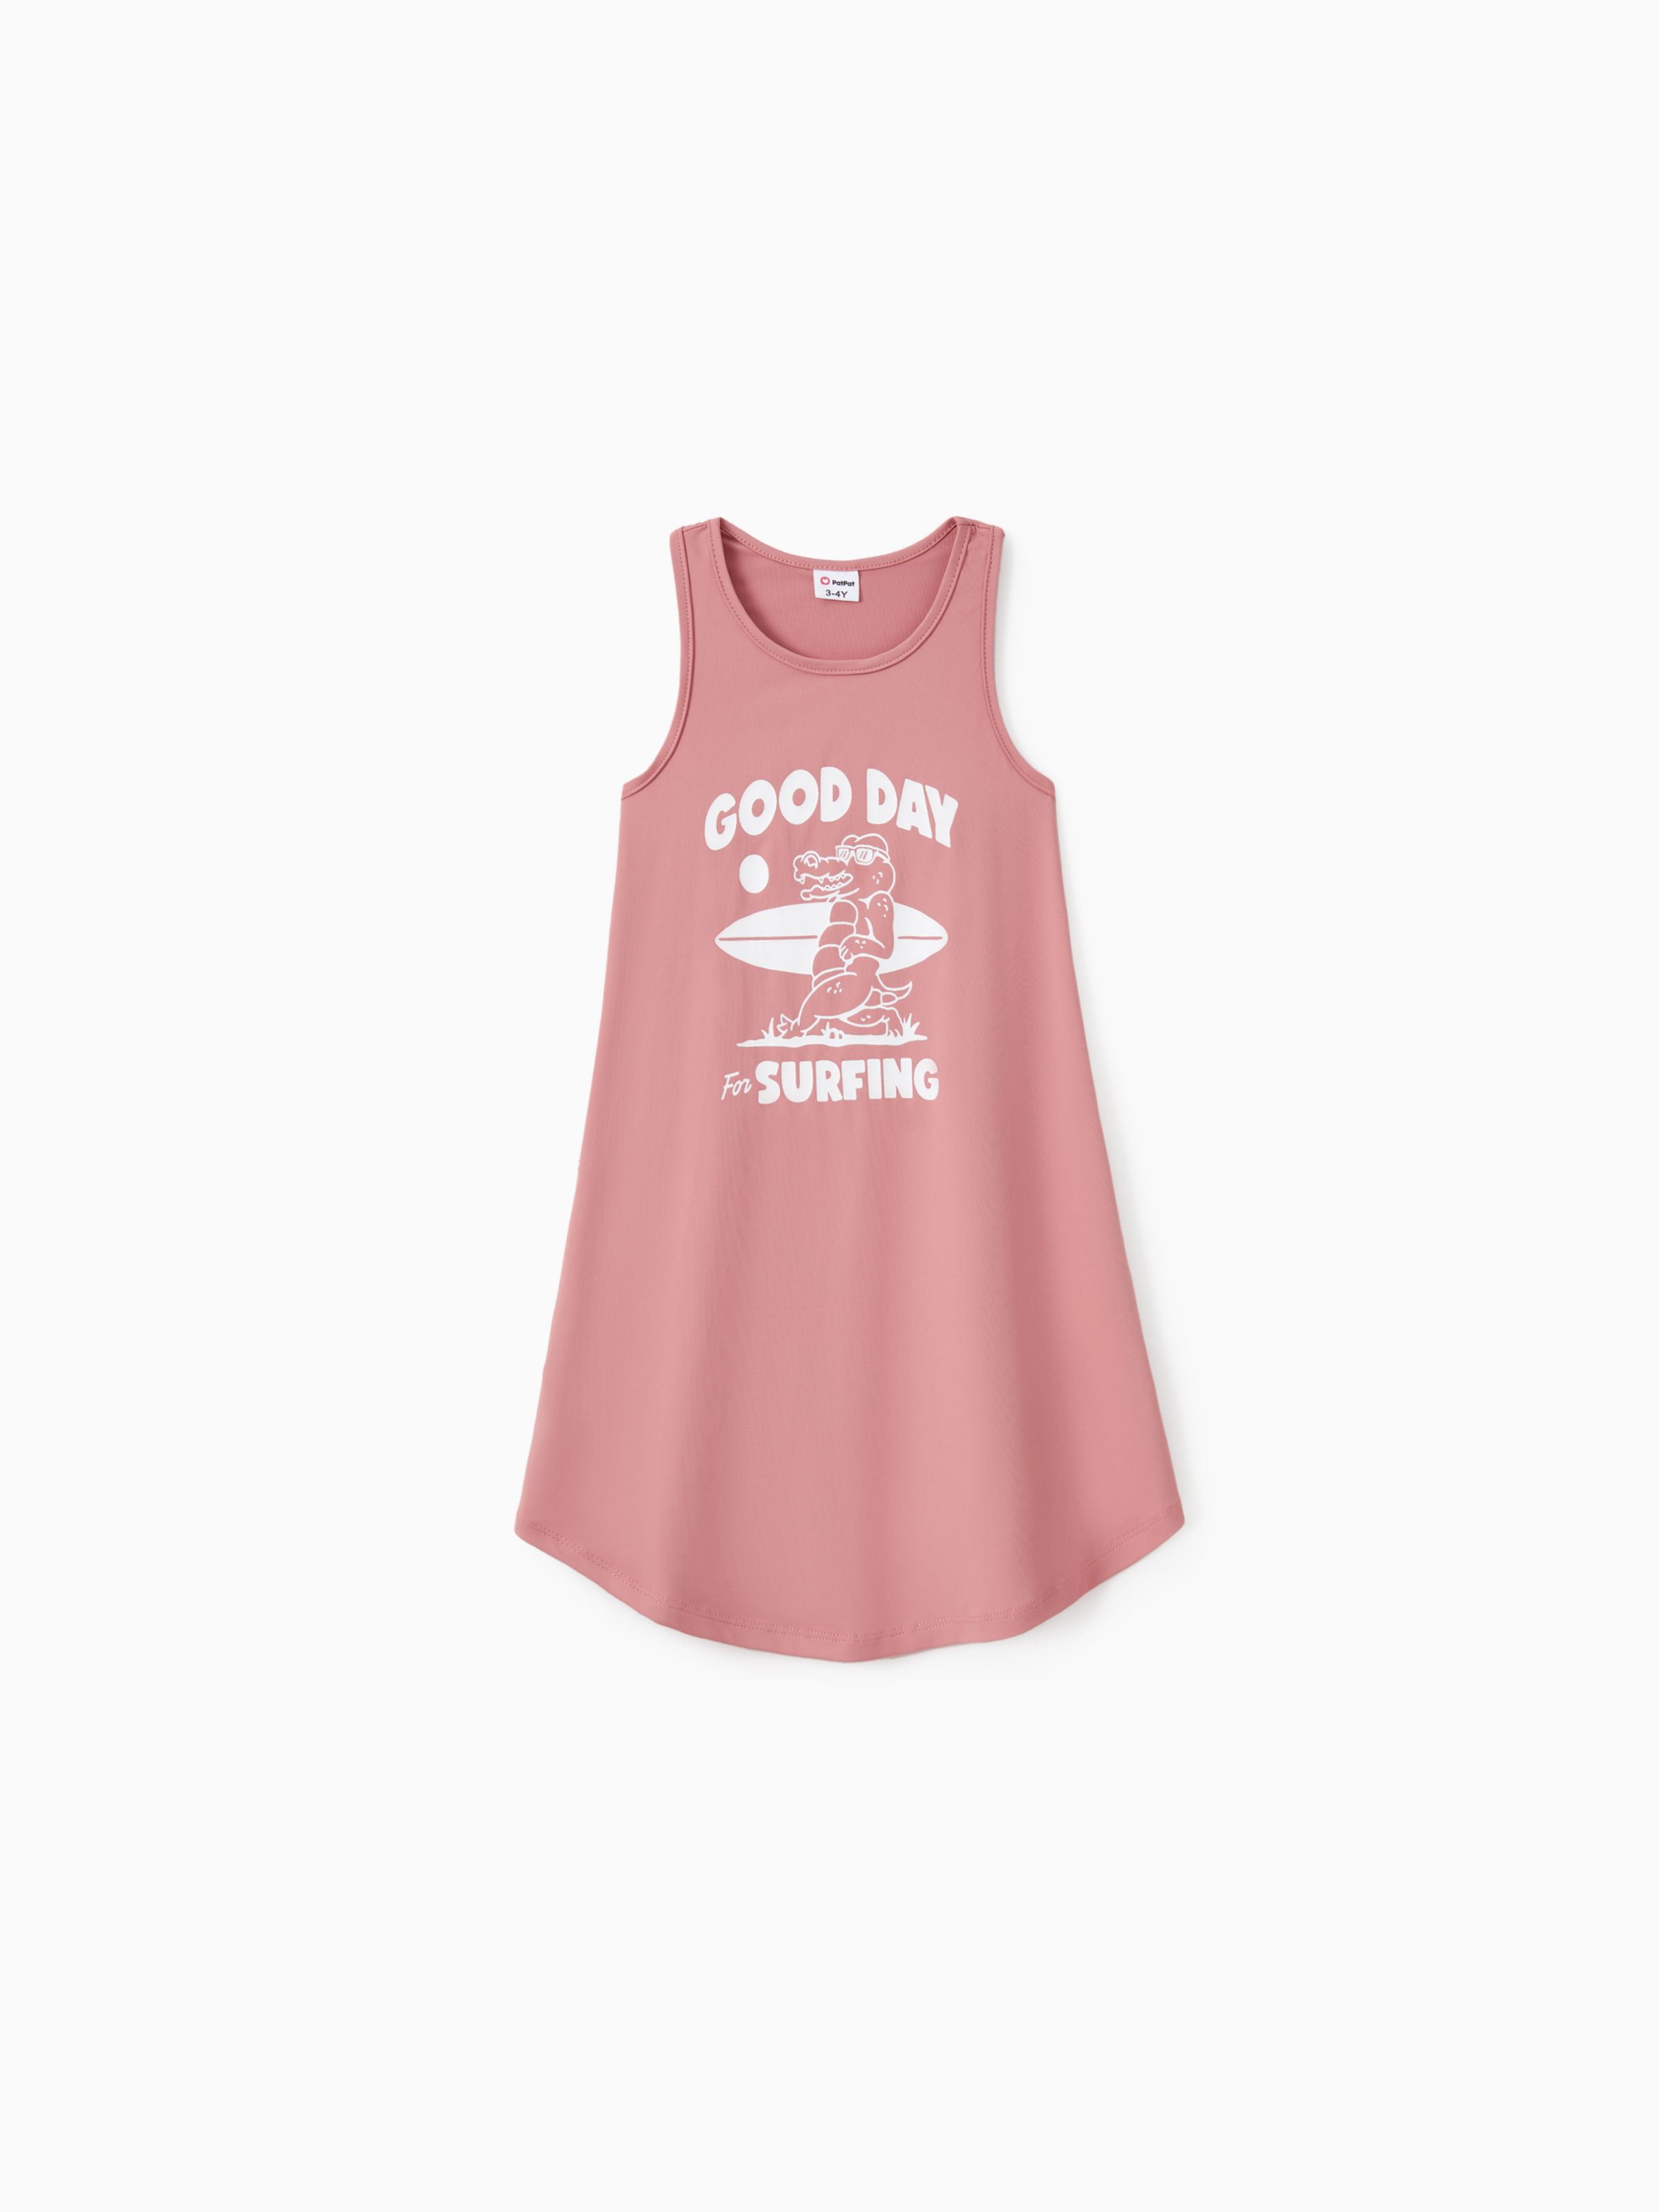 

Quick-Dry Mommy and Me Sleeveless Surfing Dress with Crocodile Graphic – Perfect for a Good Day on the Waves